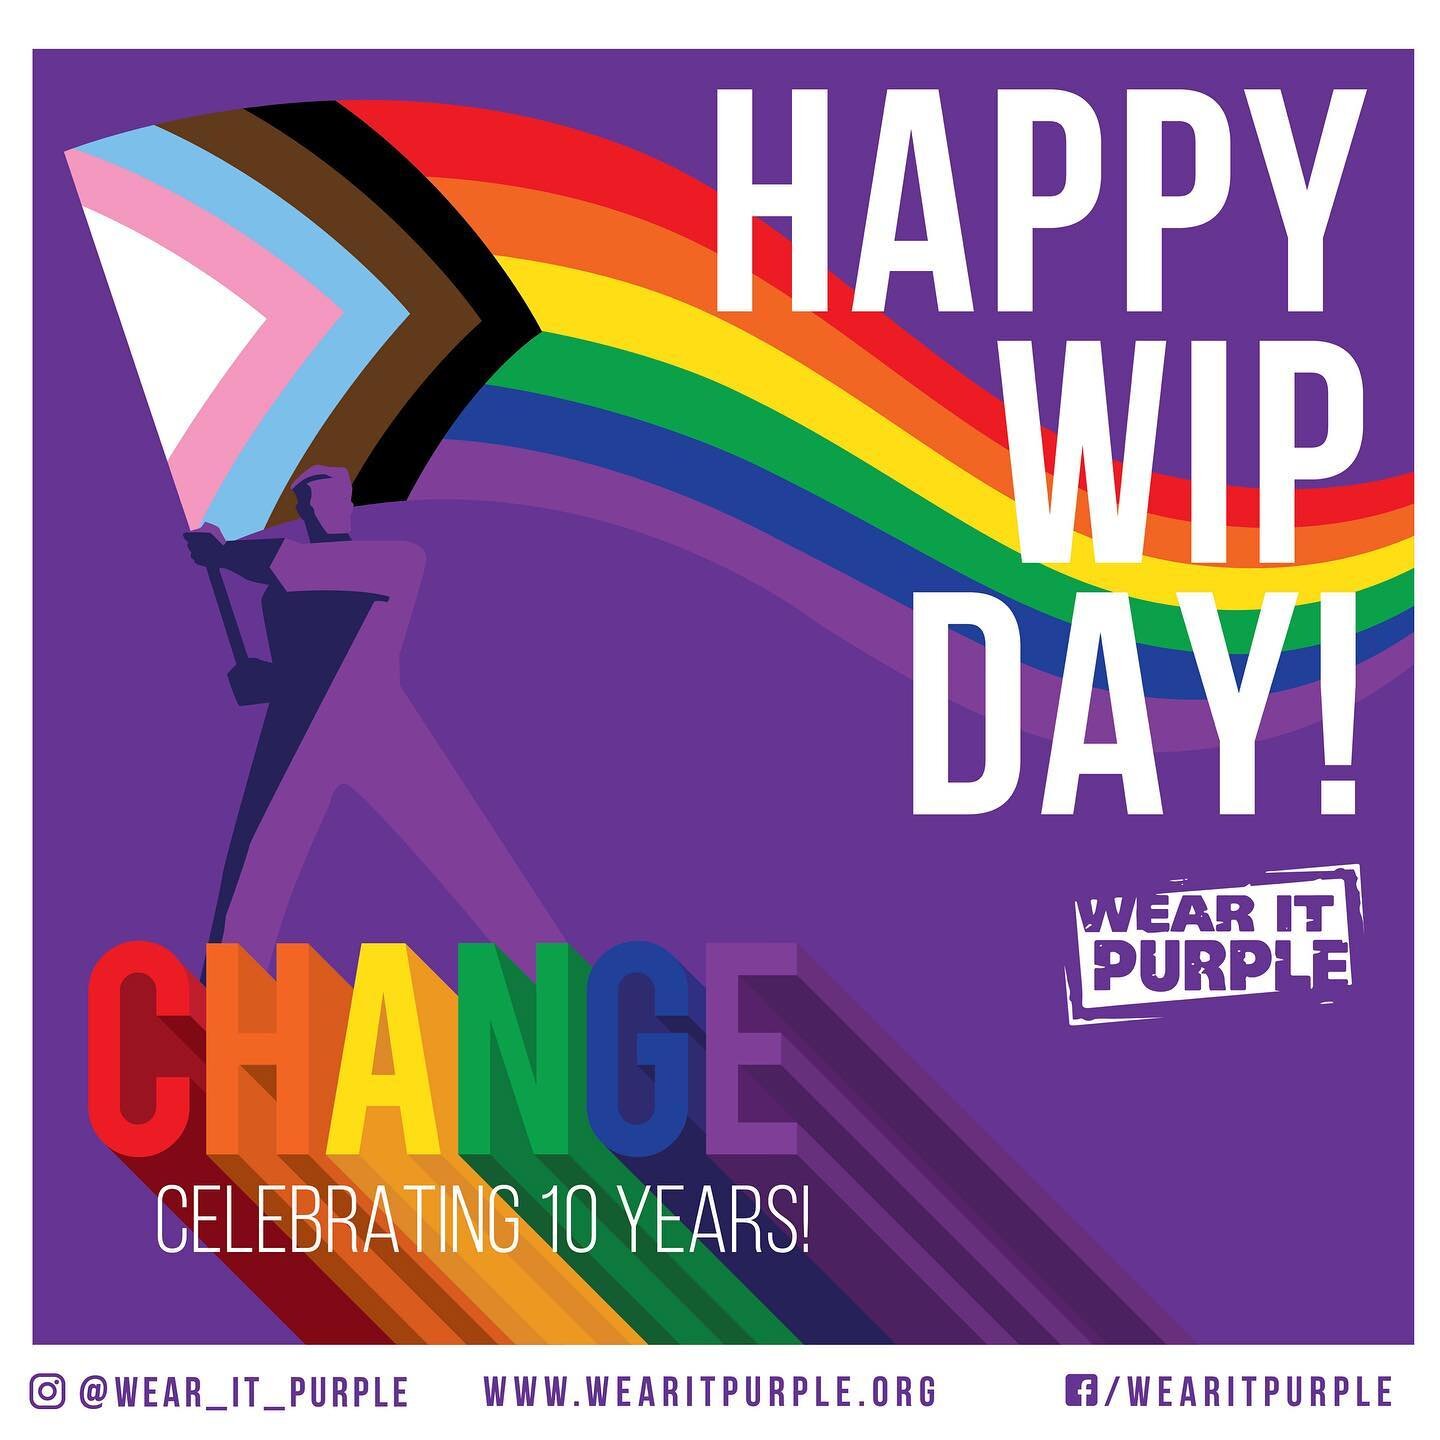 We&rsquo;re wearing it purple today in support of #wearitpurpleday2020 💜💜💜🌈

Wear It Purple&rsquo;s 2020 theme envisions the importance of encouragement, empowerment and emphasis on making effective change for LGBTQ+ people and all minority group